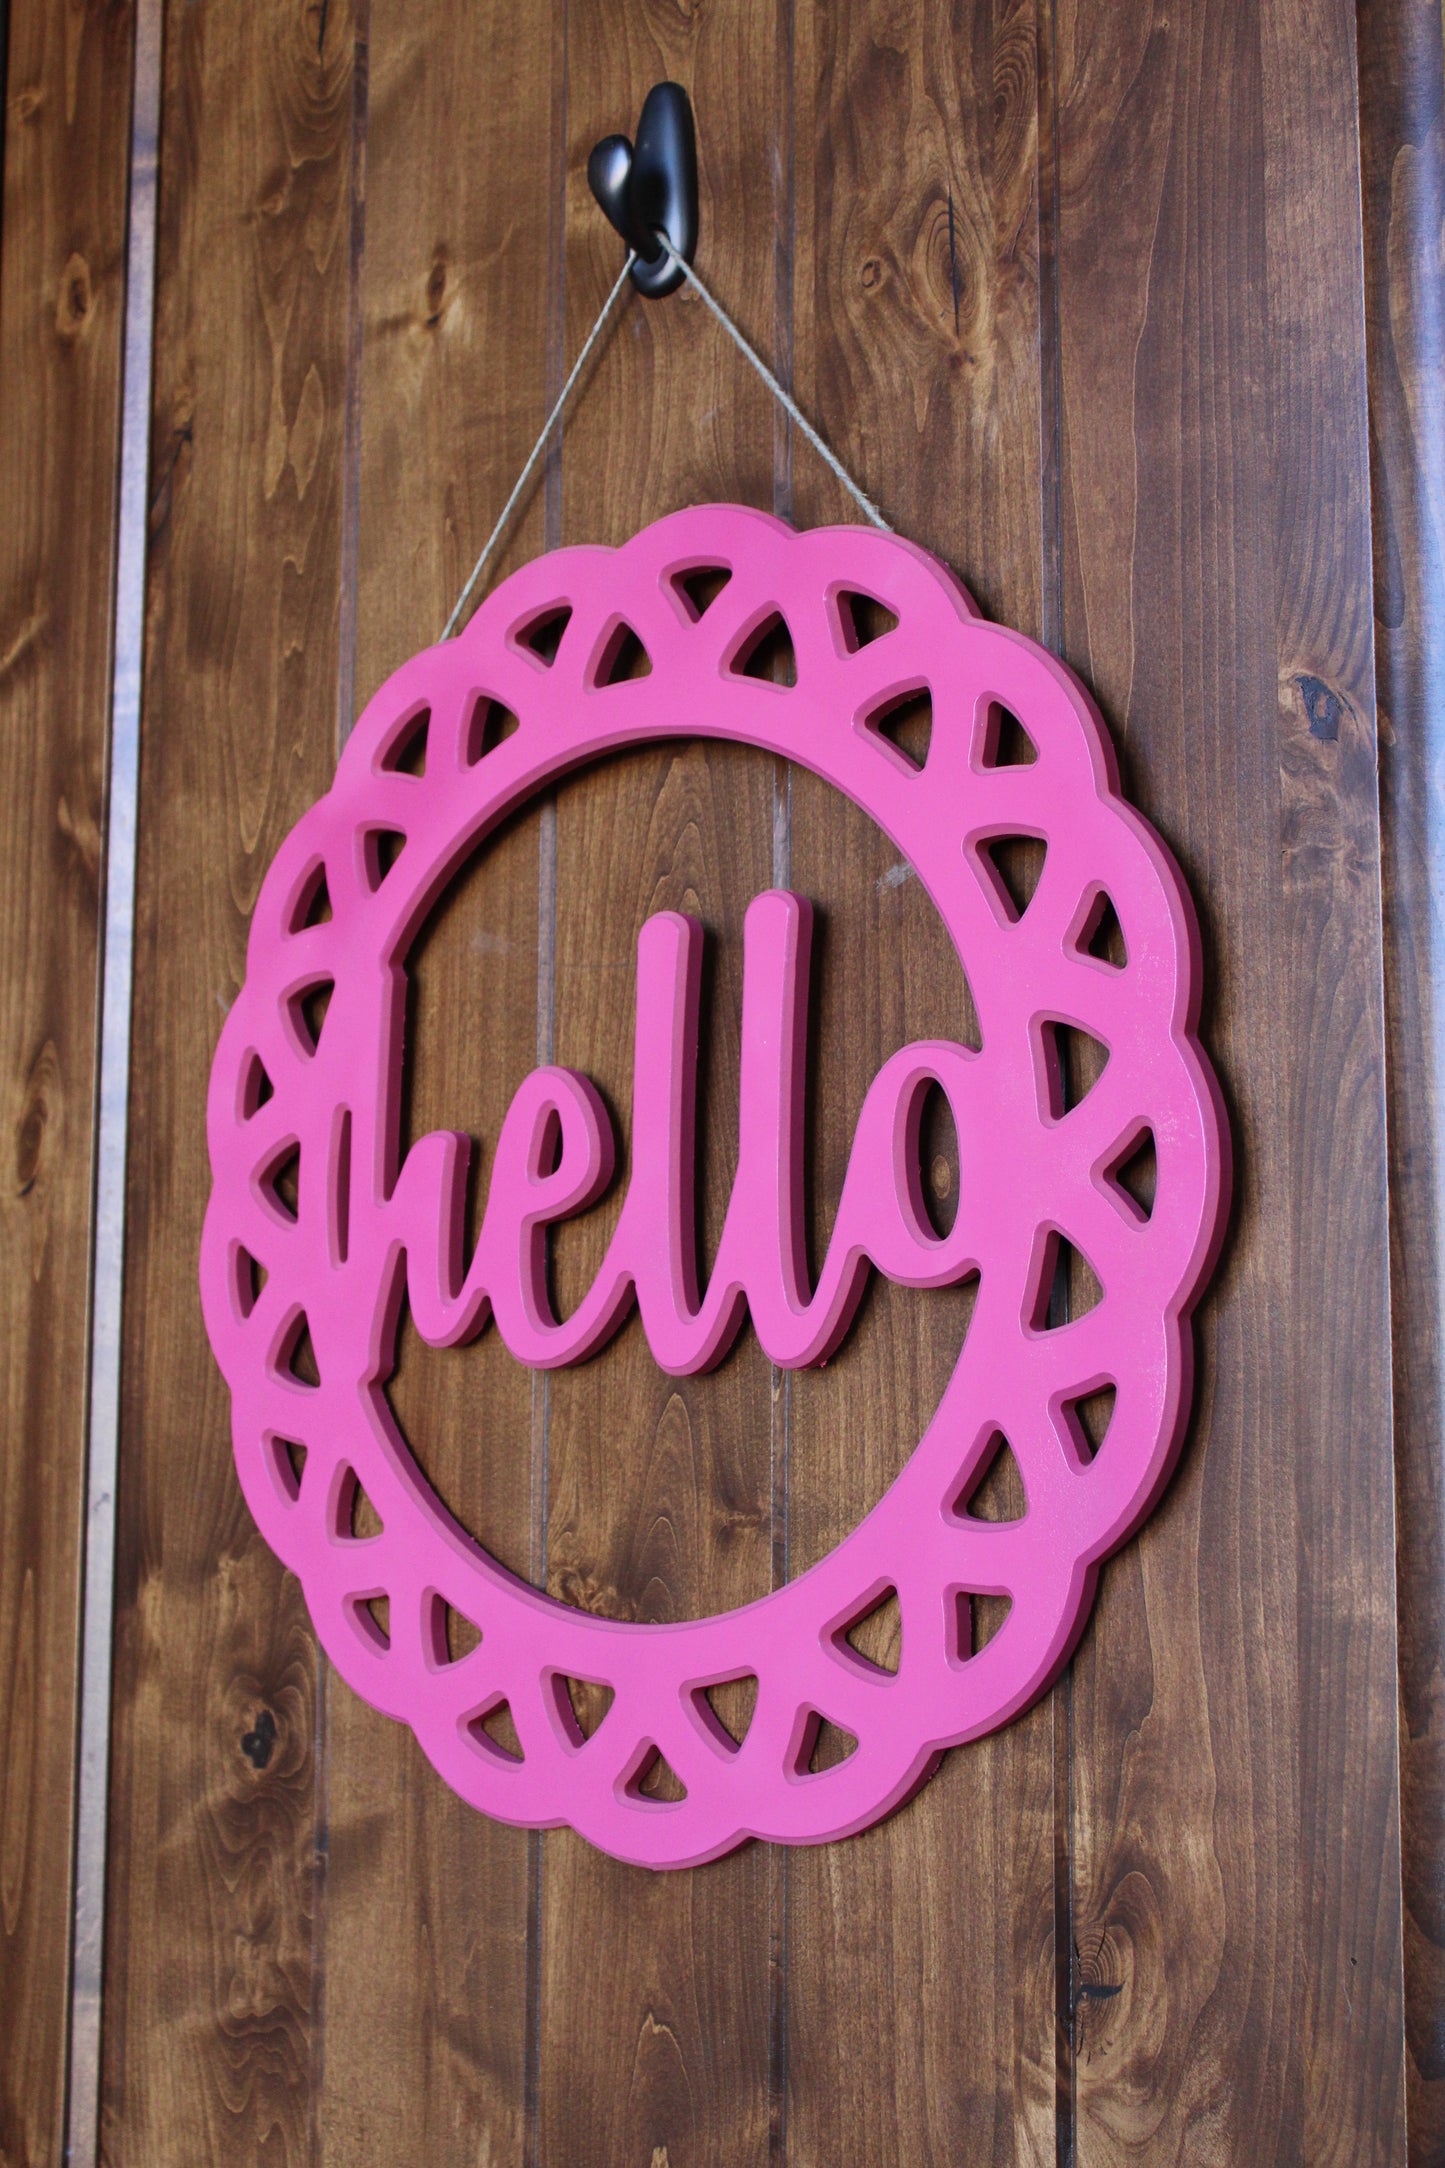 Classic 'Hello' Lattice Circle Door Sign – 23.5" Elegant Welcome Sign for Home Entrance